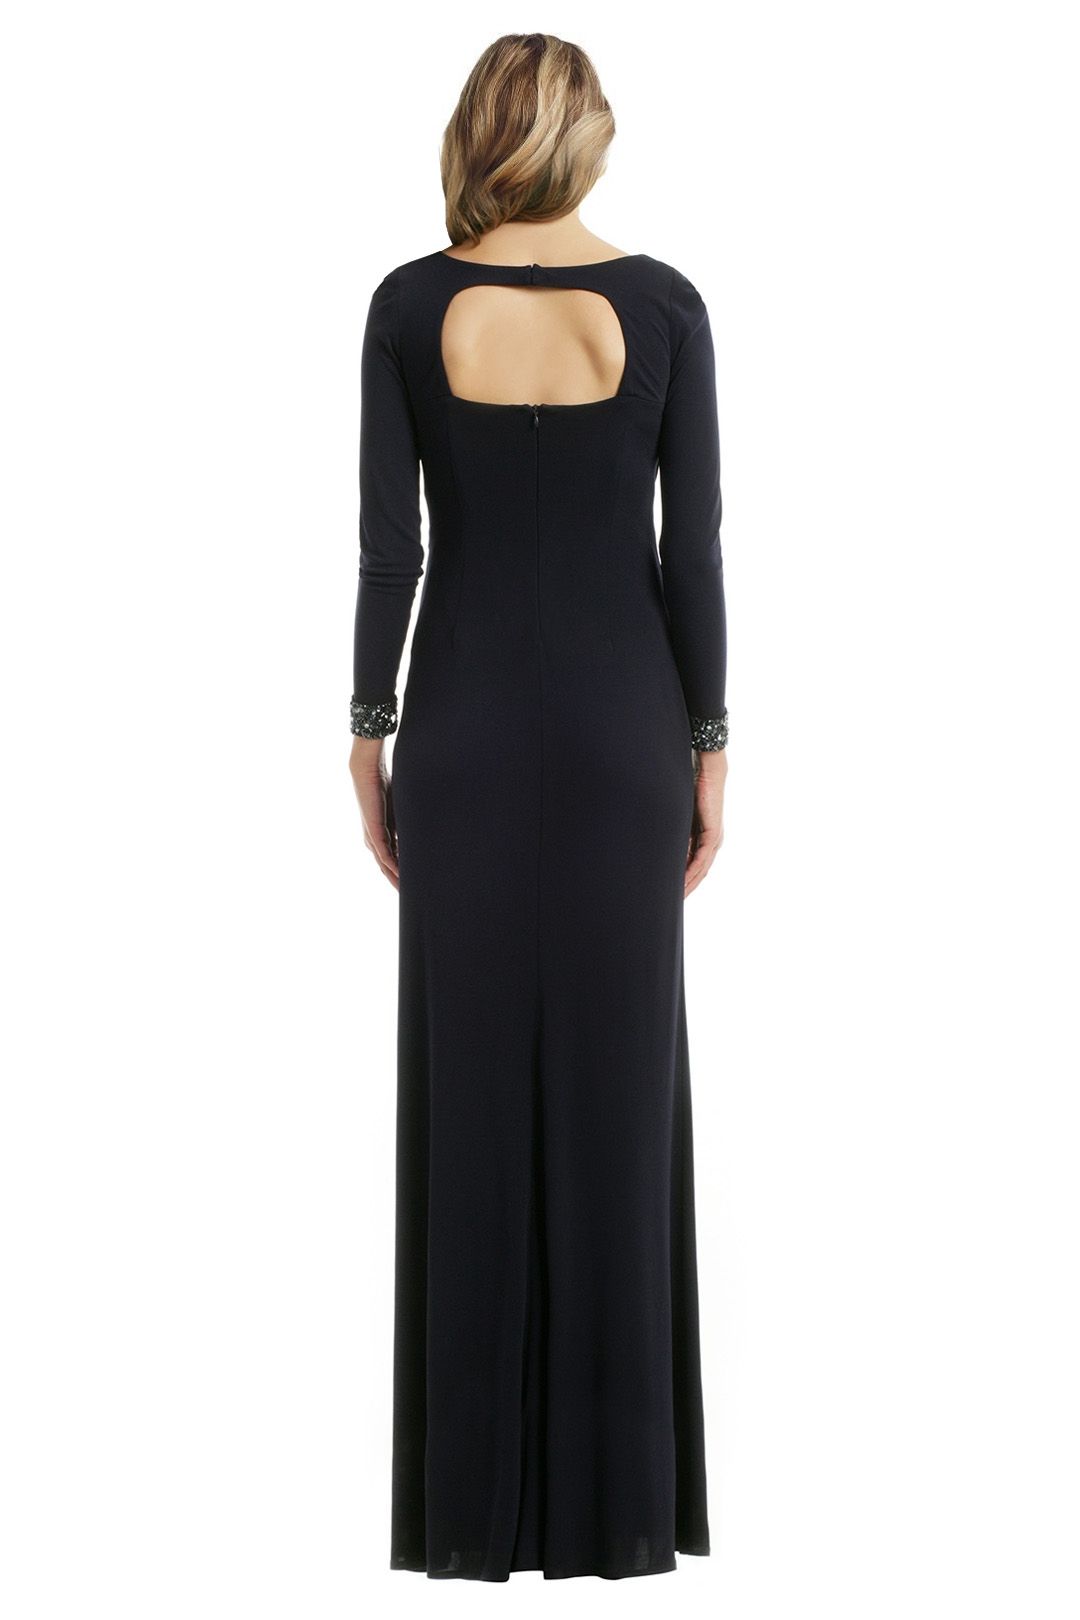 David Meister - Cuff Out Back Gown  - Navy - Back